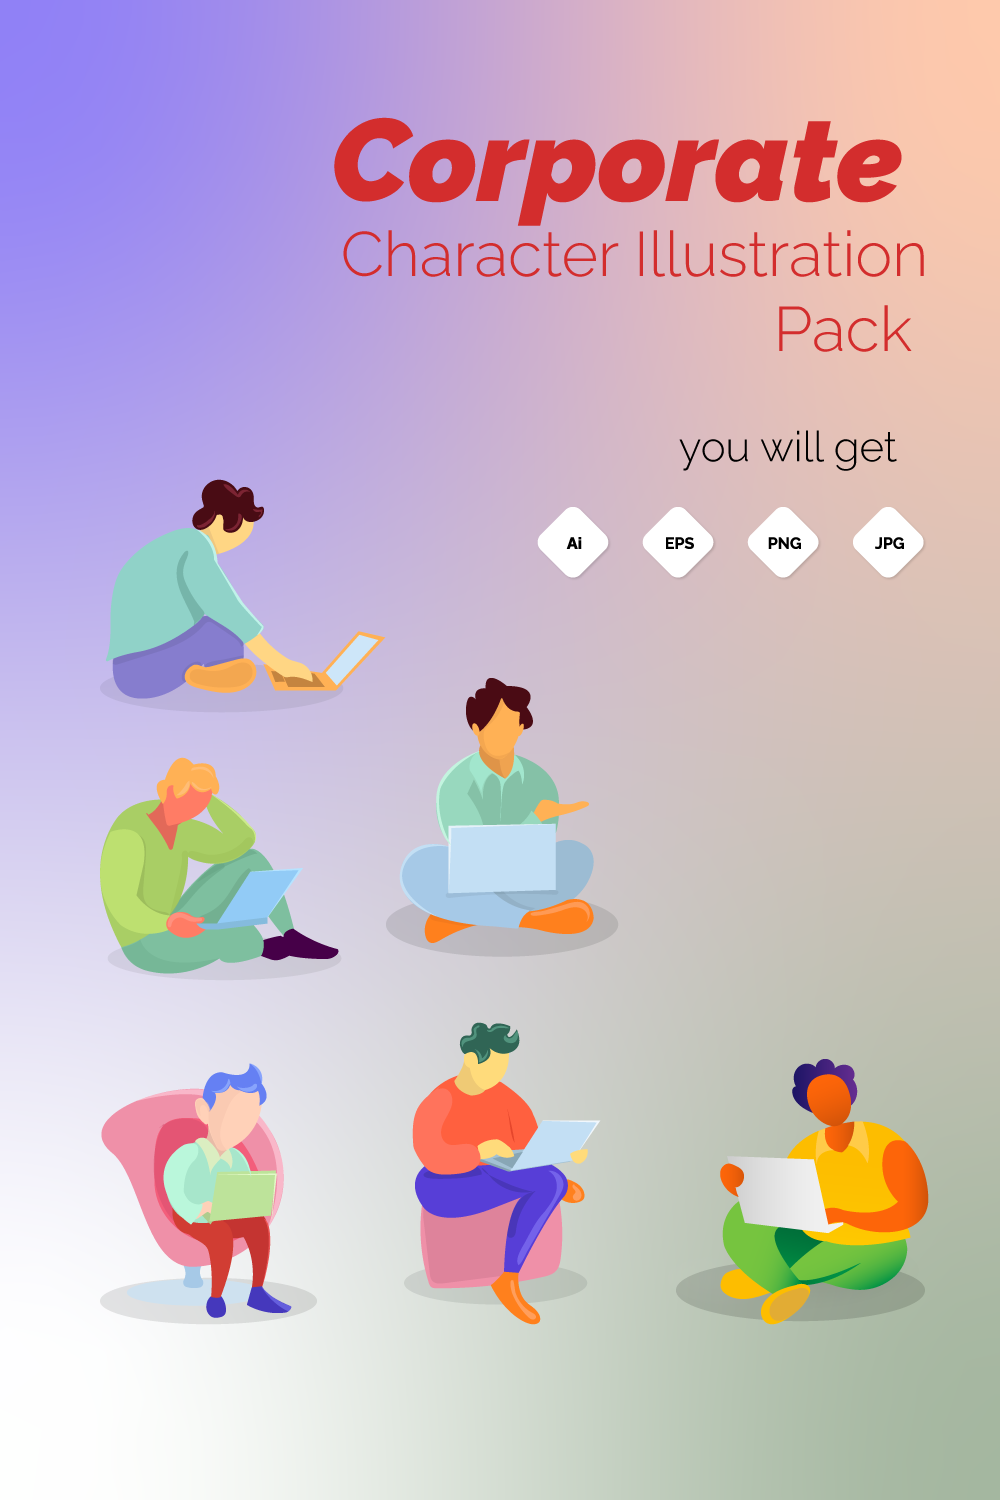 Corporate Character illustration pack pinterest preview image.